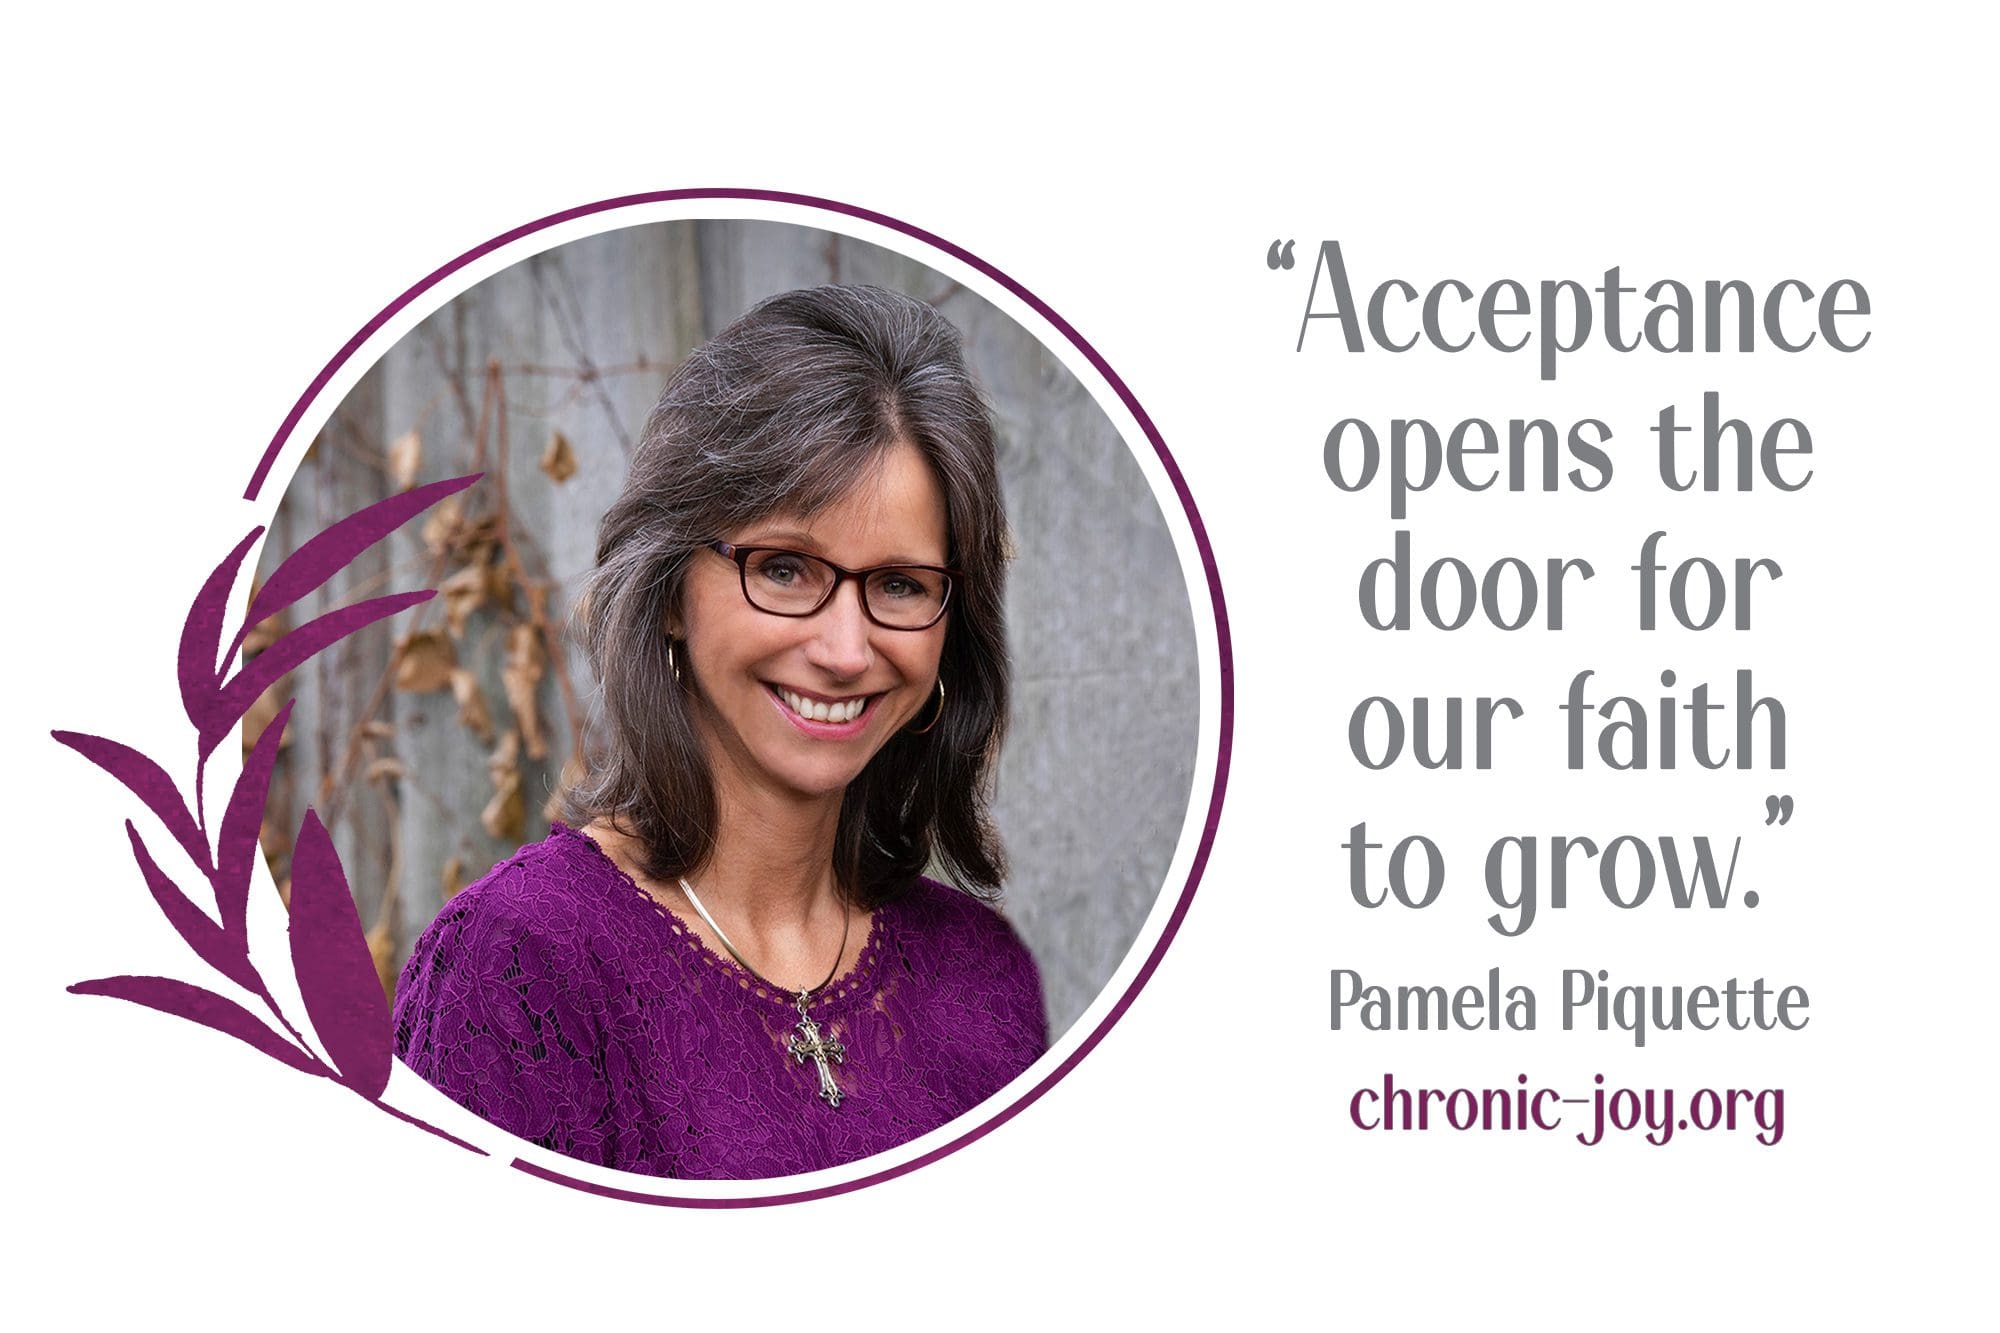 “Acceptance opens the door for our faith to grow.” Pamela Piquette